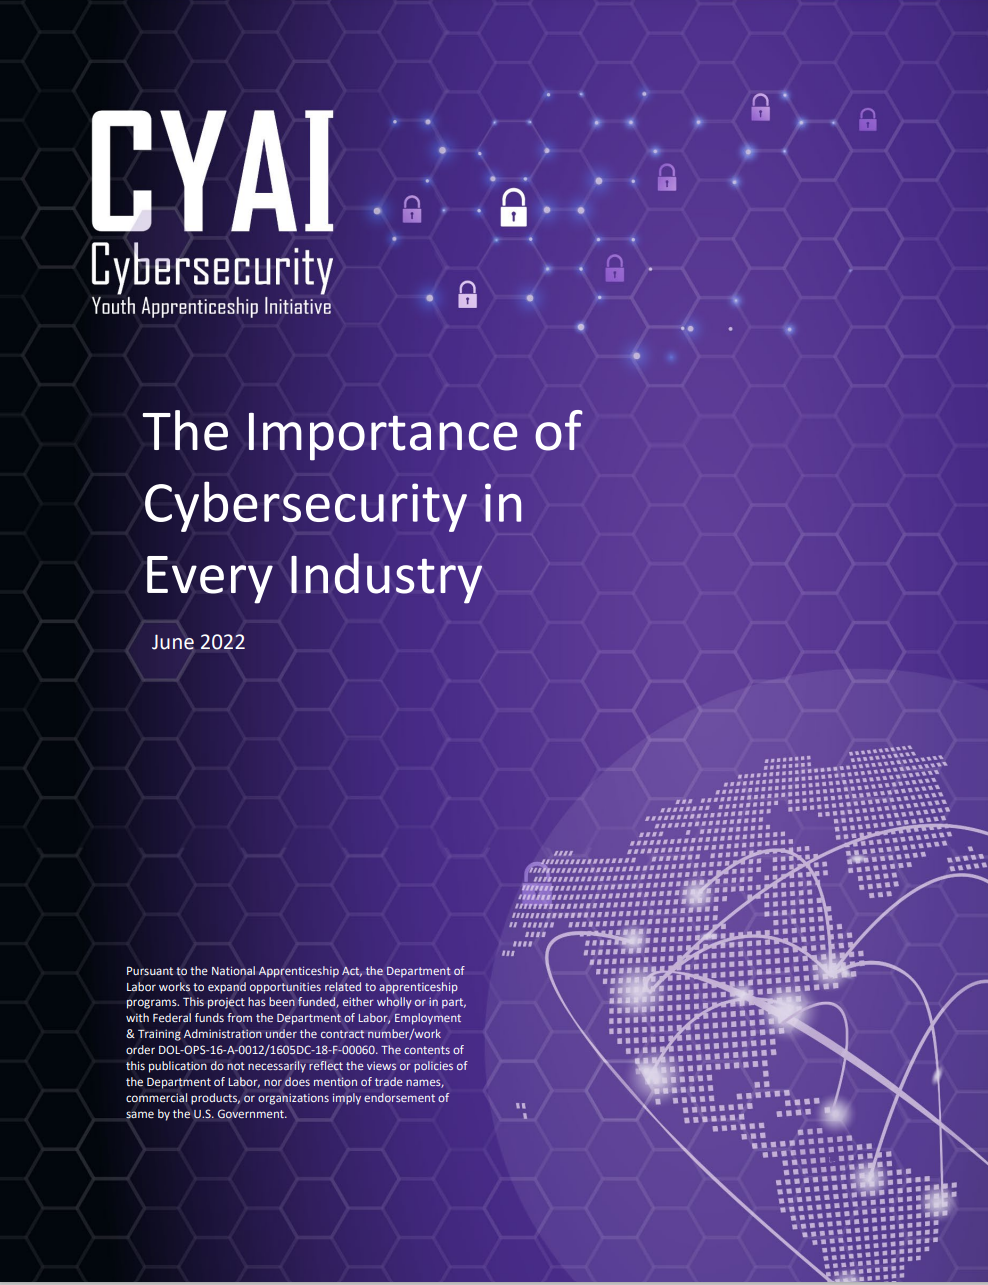 Preview of the first page of the document that includes text/graphics to describe the importance of cybersecurity jobs.